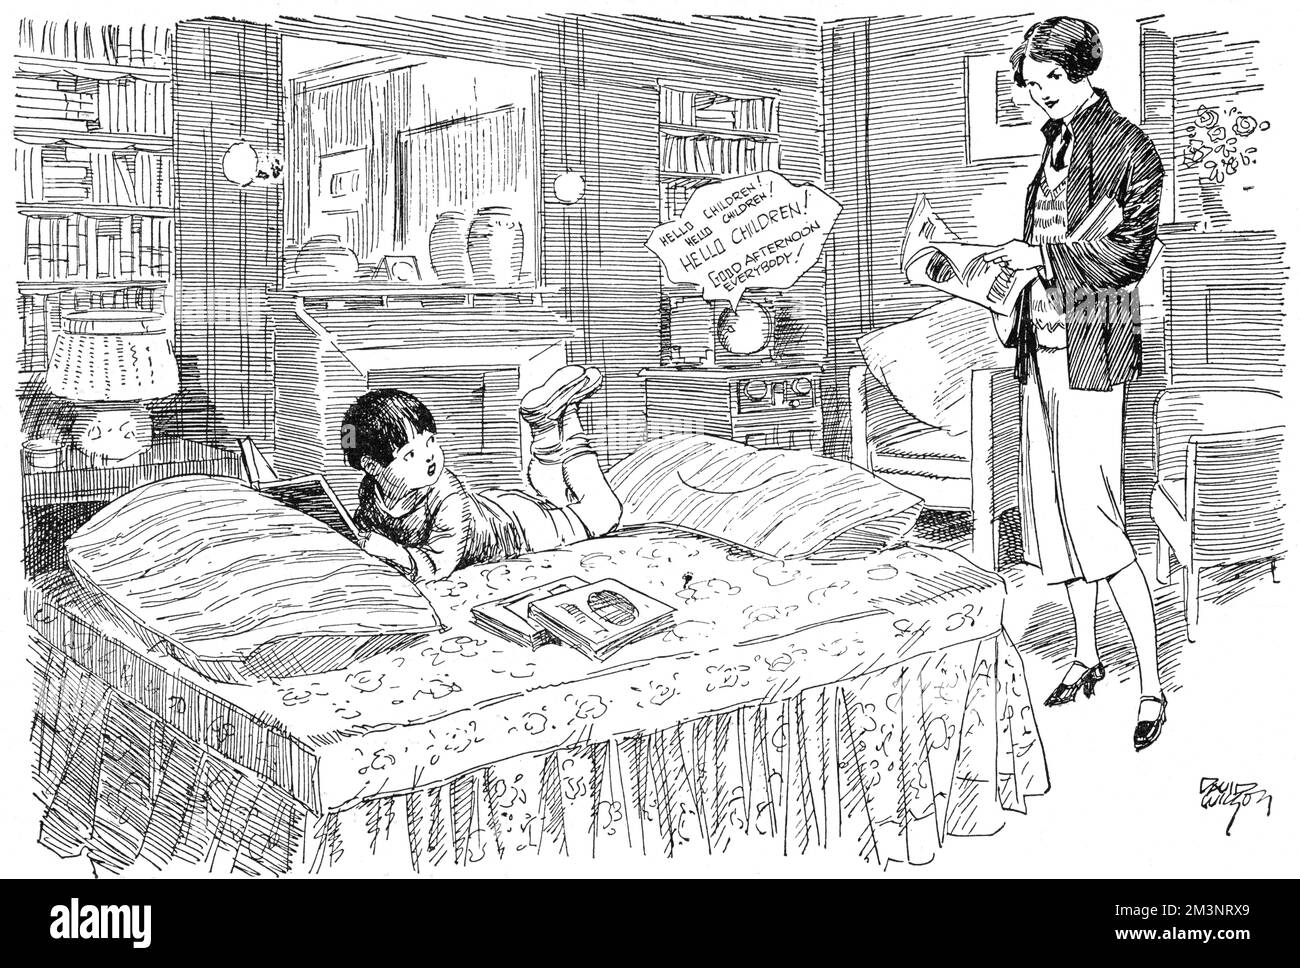 Humorous cartoon showing a small, rather grown-up and intellectual boy lying on his bed reading while the radio is on and saying to his mother, 'There goes that 'Children's Hour'!  Do you mind, mother, switching it off?'.       Date: 1930 Stock Photo